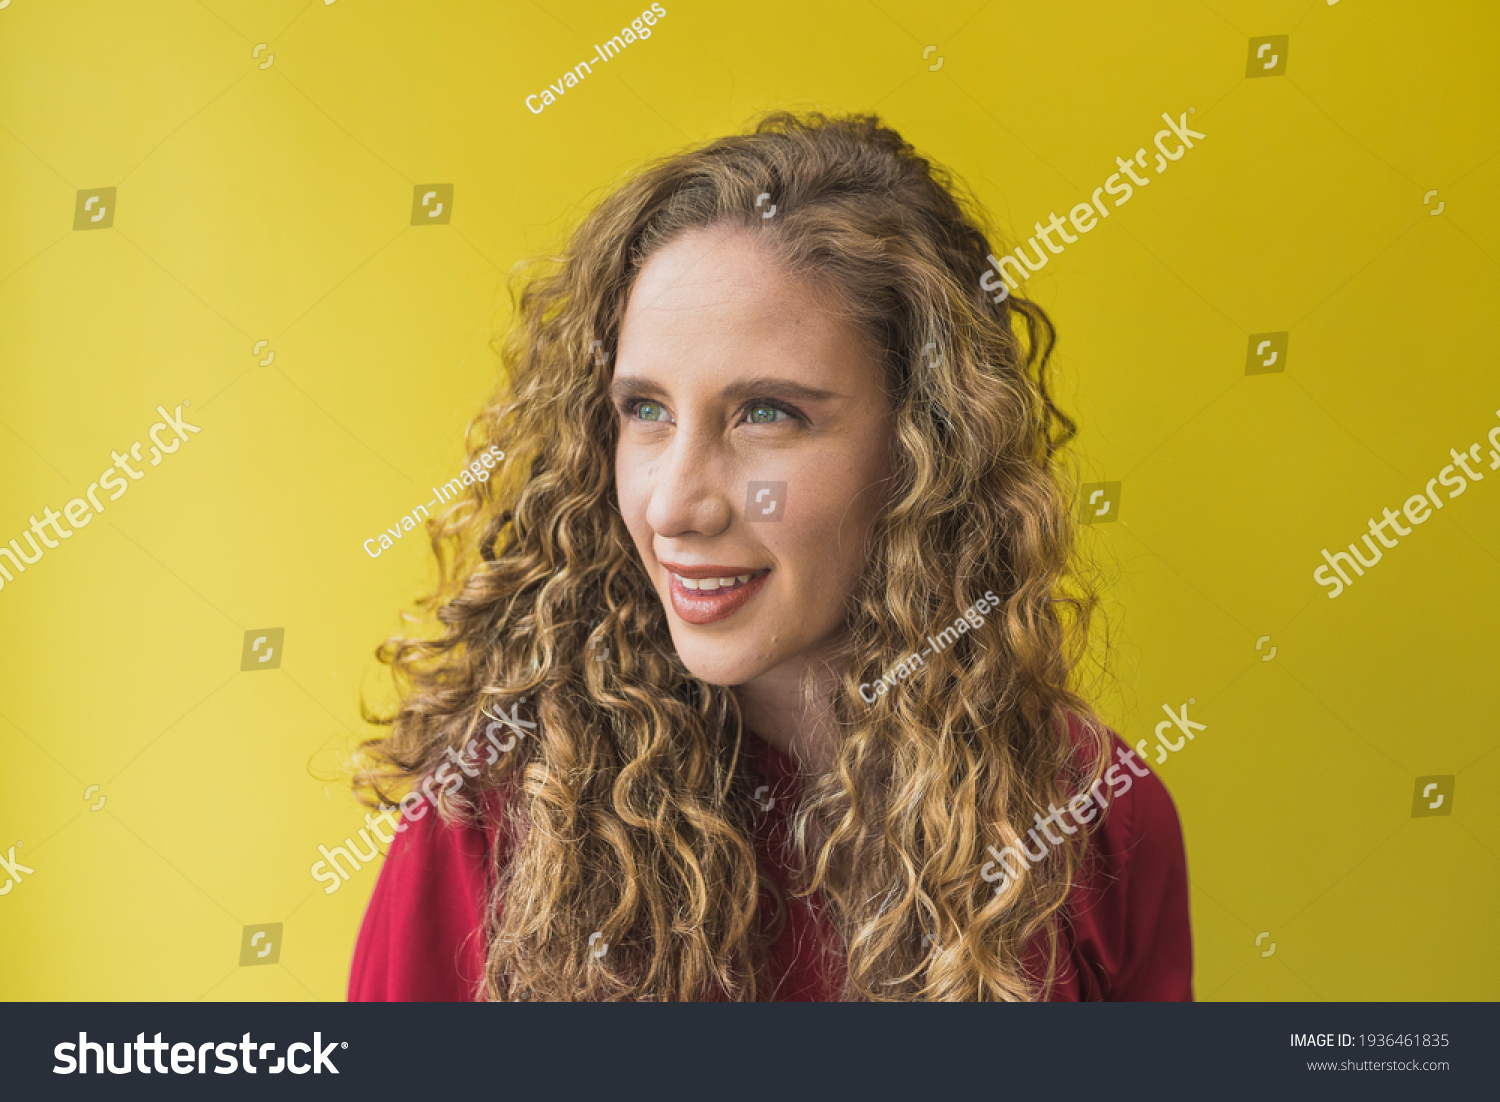 1. Tanish Blonde Hair Girl - Stock Photos and Images - wide 7